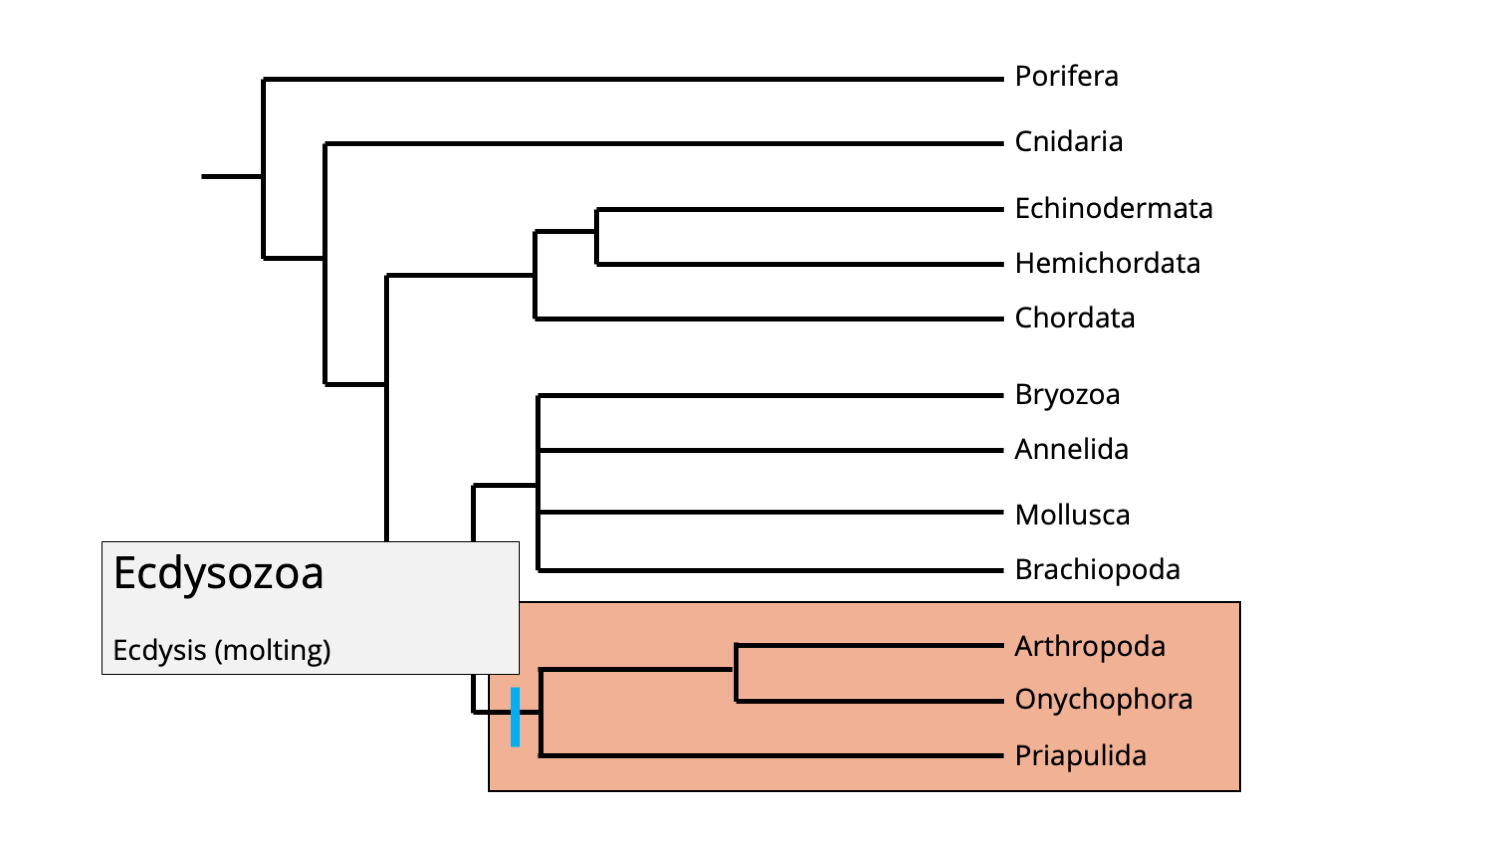 Phylogenetic position of the ecdysozoan clade.